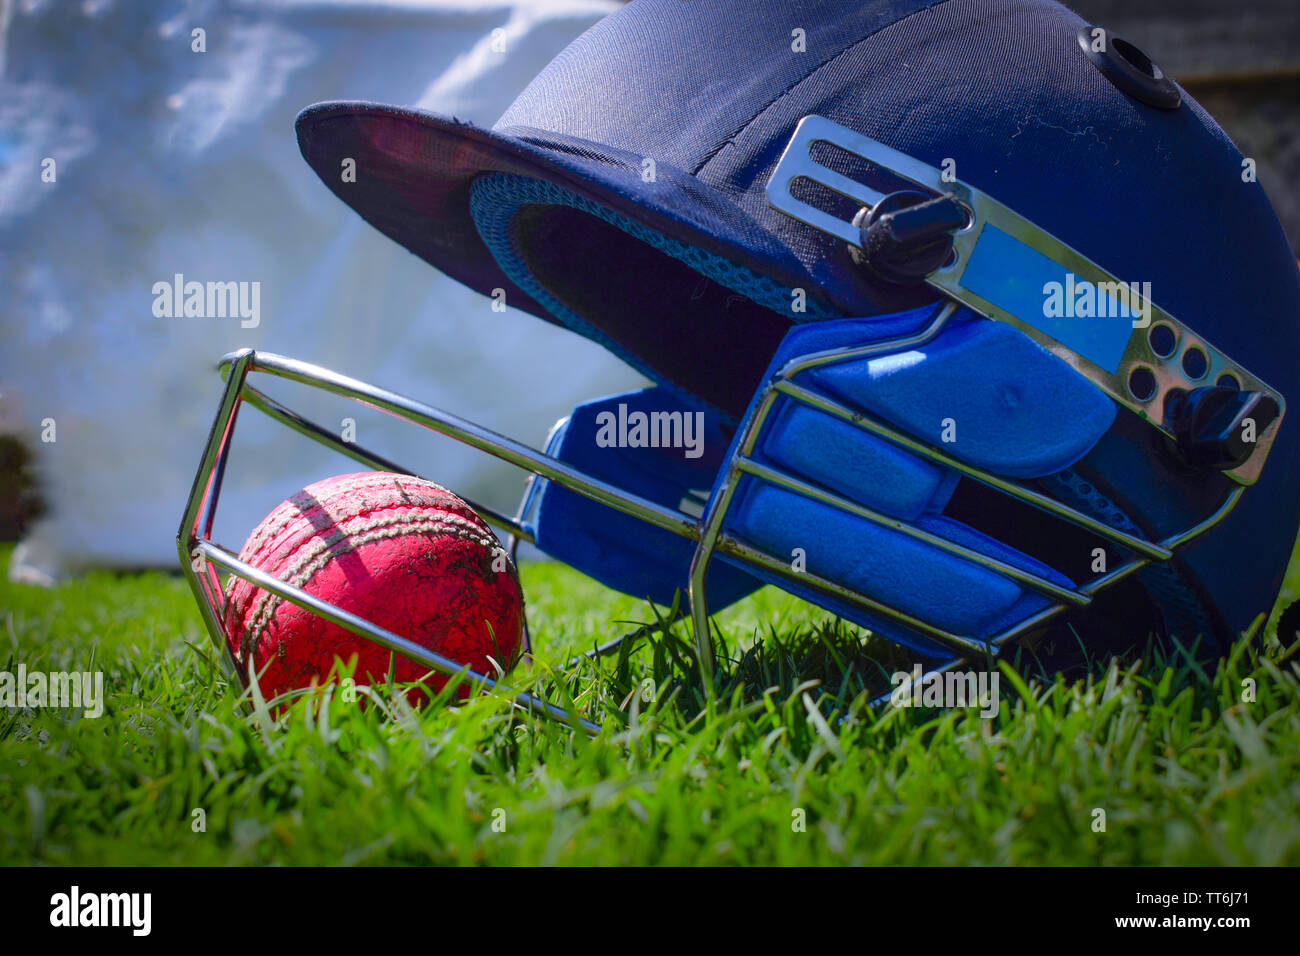 Cricket halmet and a ball on a green grass. Helmet protects batsman from fast balls which may otherwise cause harm to playing person. Stock Photo